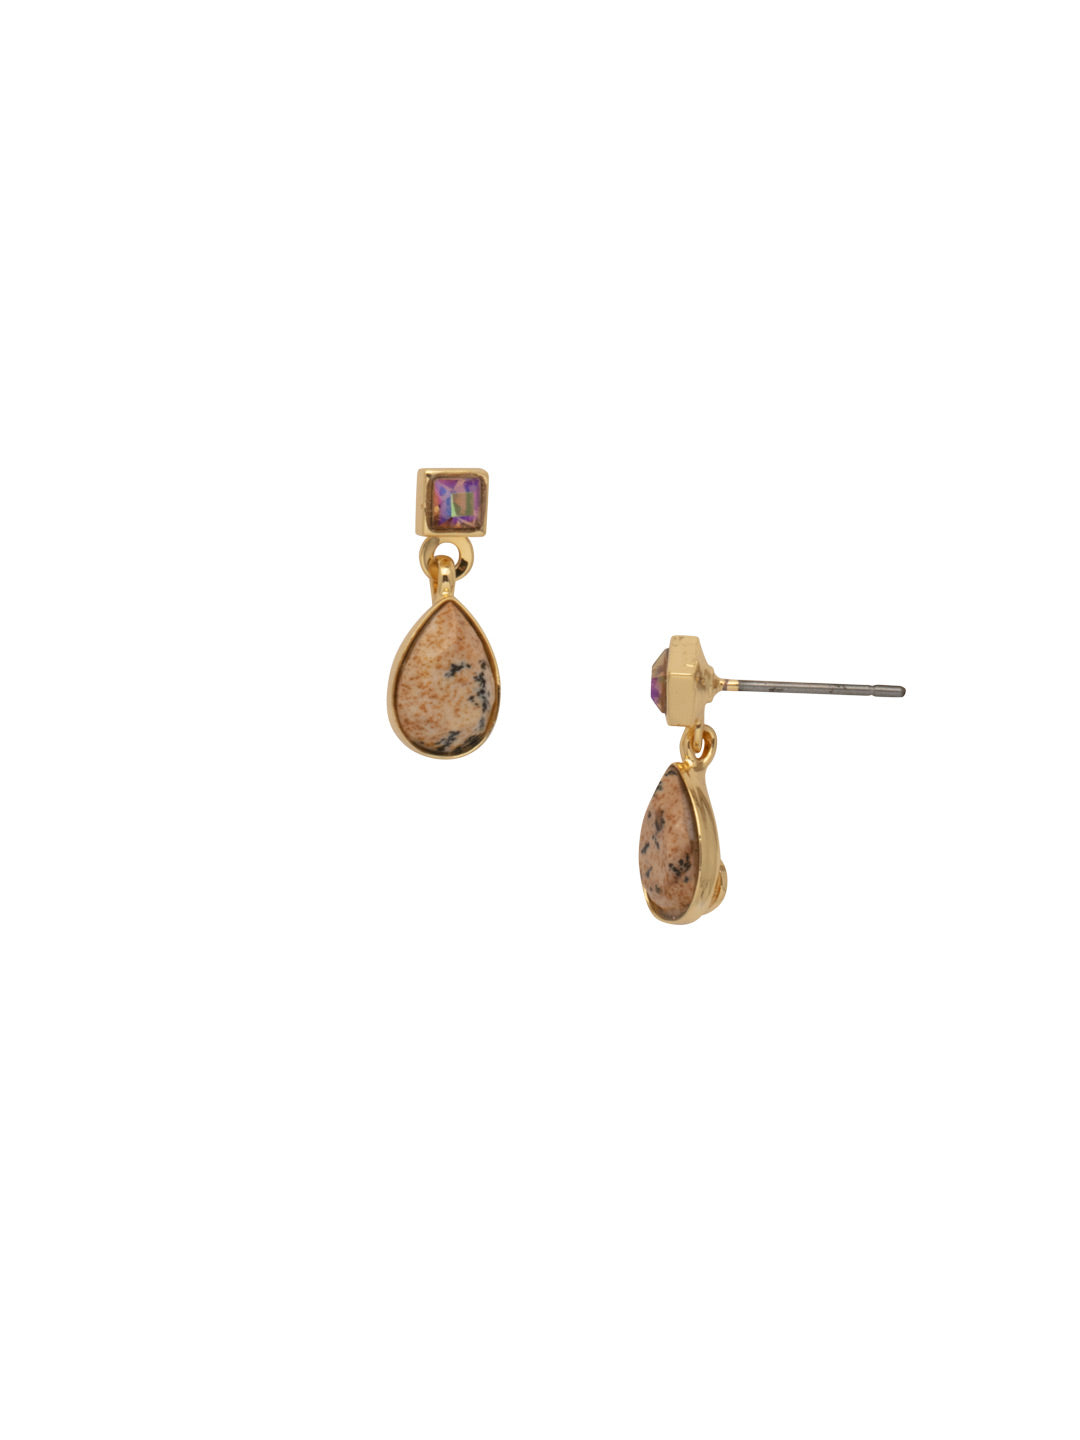 Elaina Petite Dangle Earring - EFC72BGRSU - <p>The Elaina Petite Dangle Earrings feature a small square cut crystal on a post, with a large pear cut semi-precious stone dangling below. From Sorrelli's Raw Sugar collection in our Bright Gold-tone finish.</p>